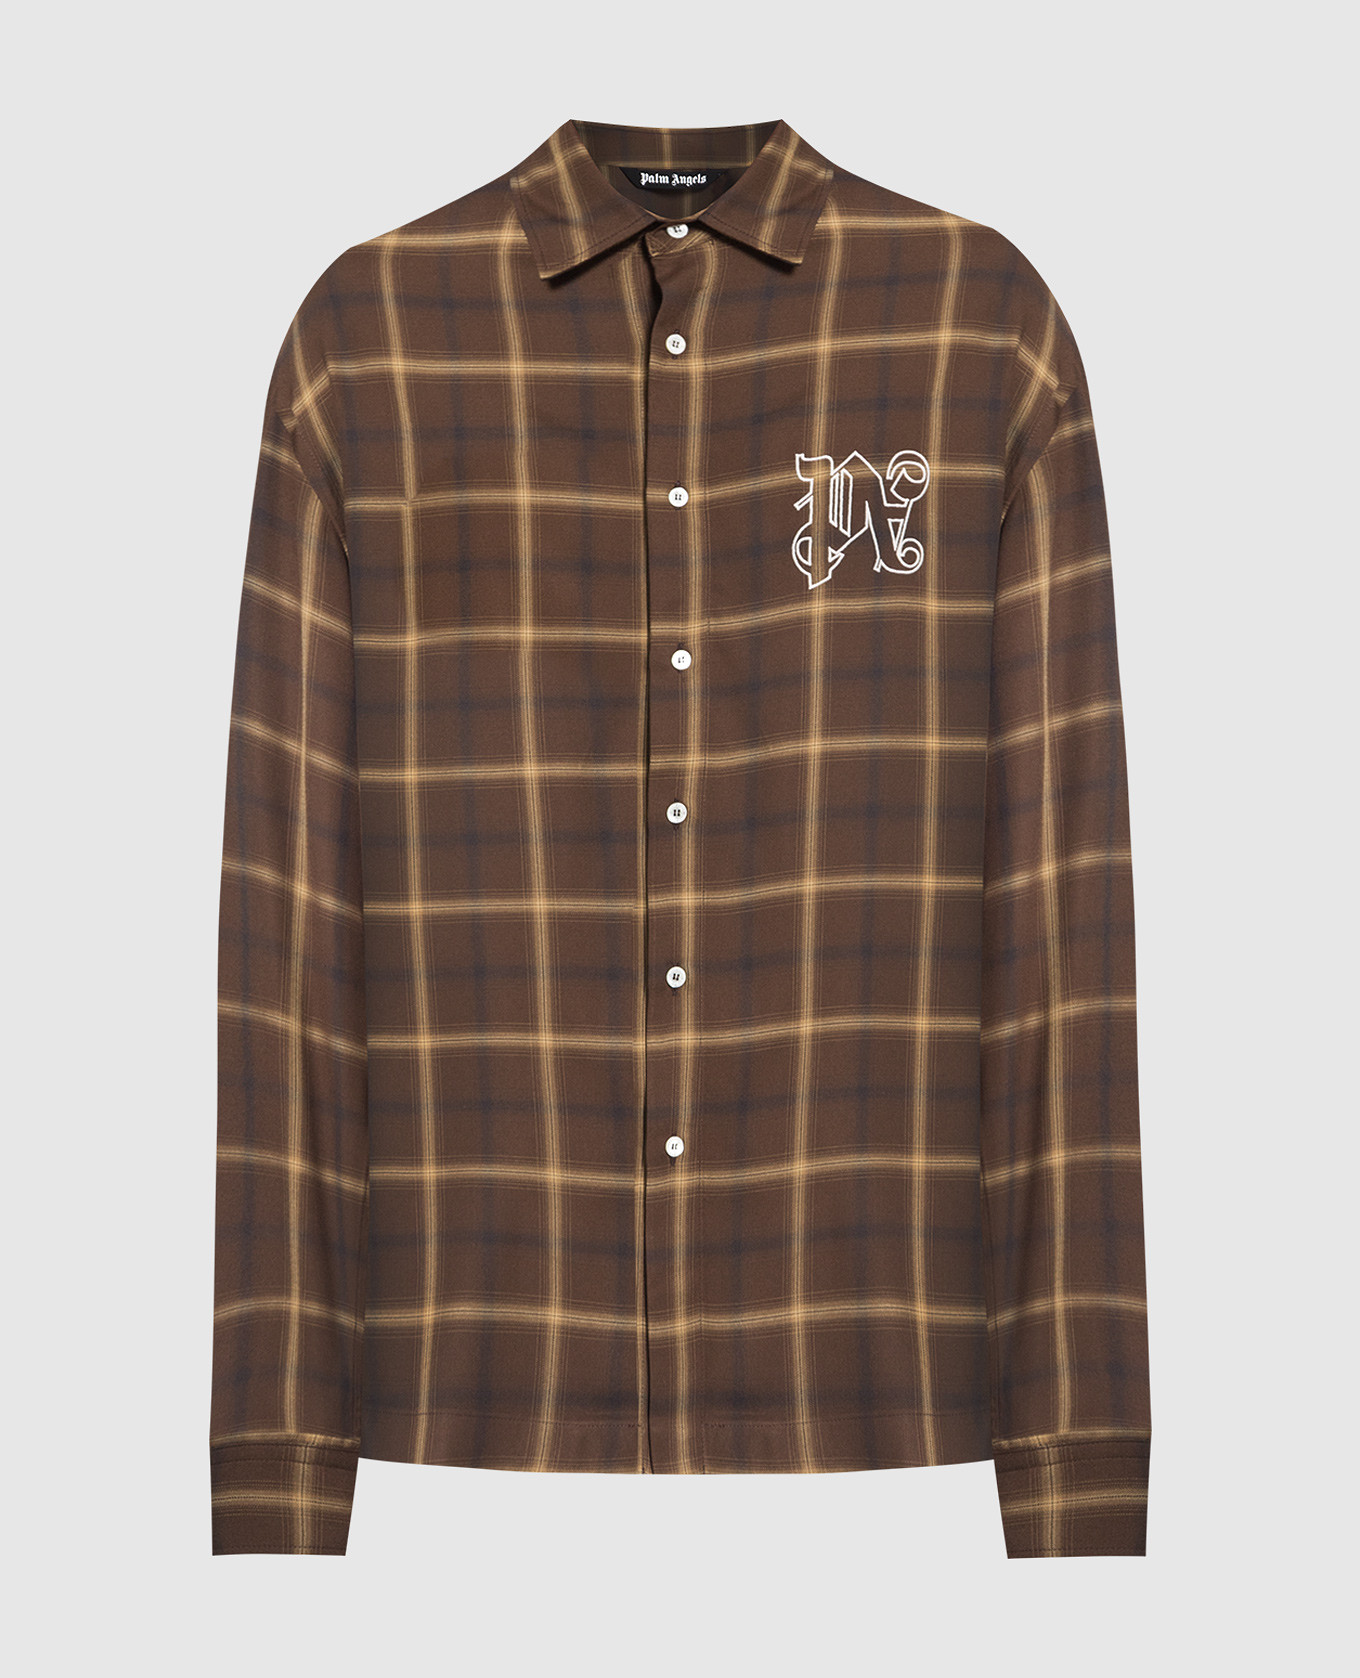 Brown checked shirt with monogram